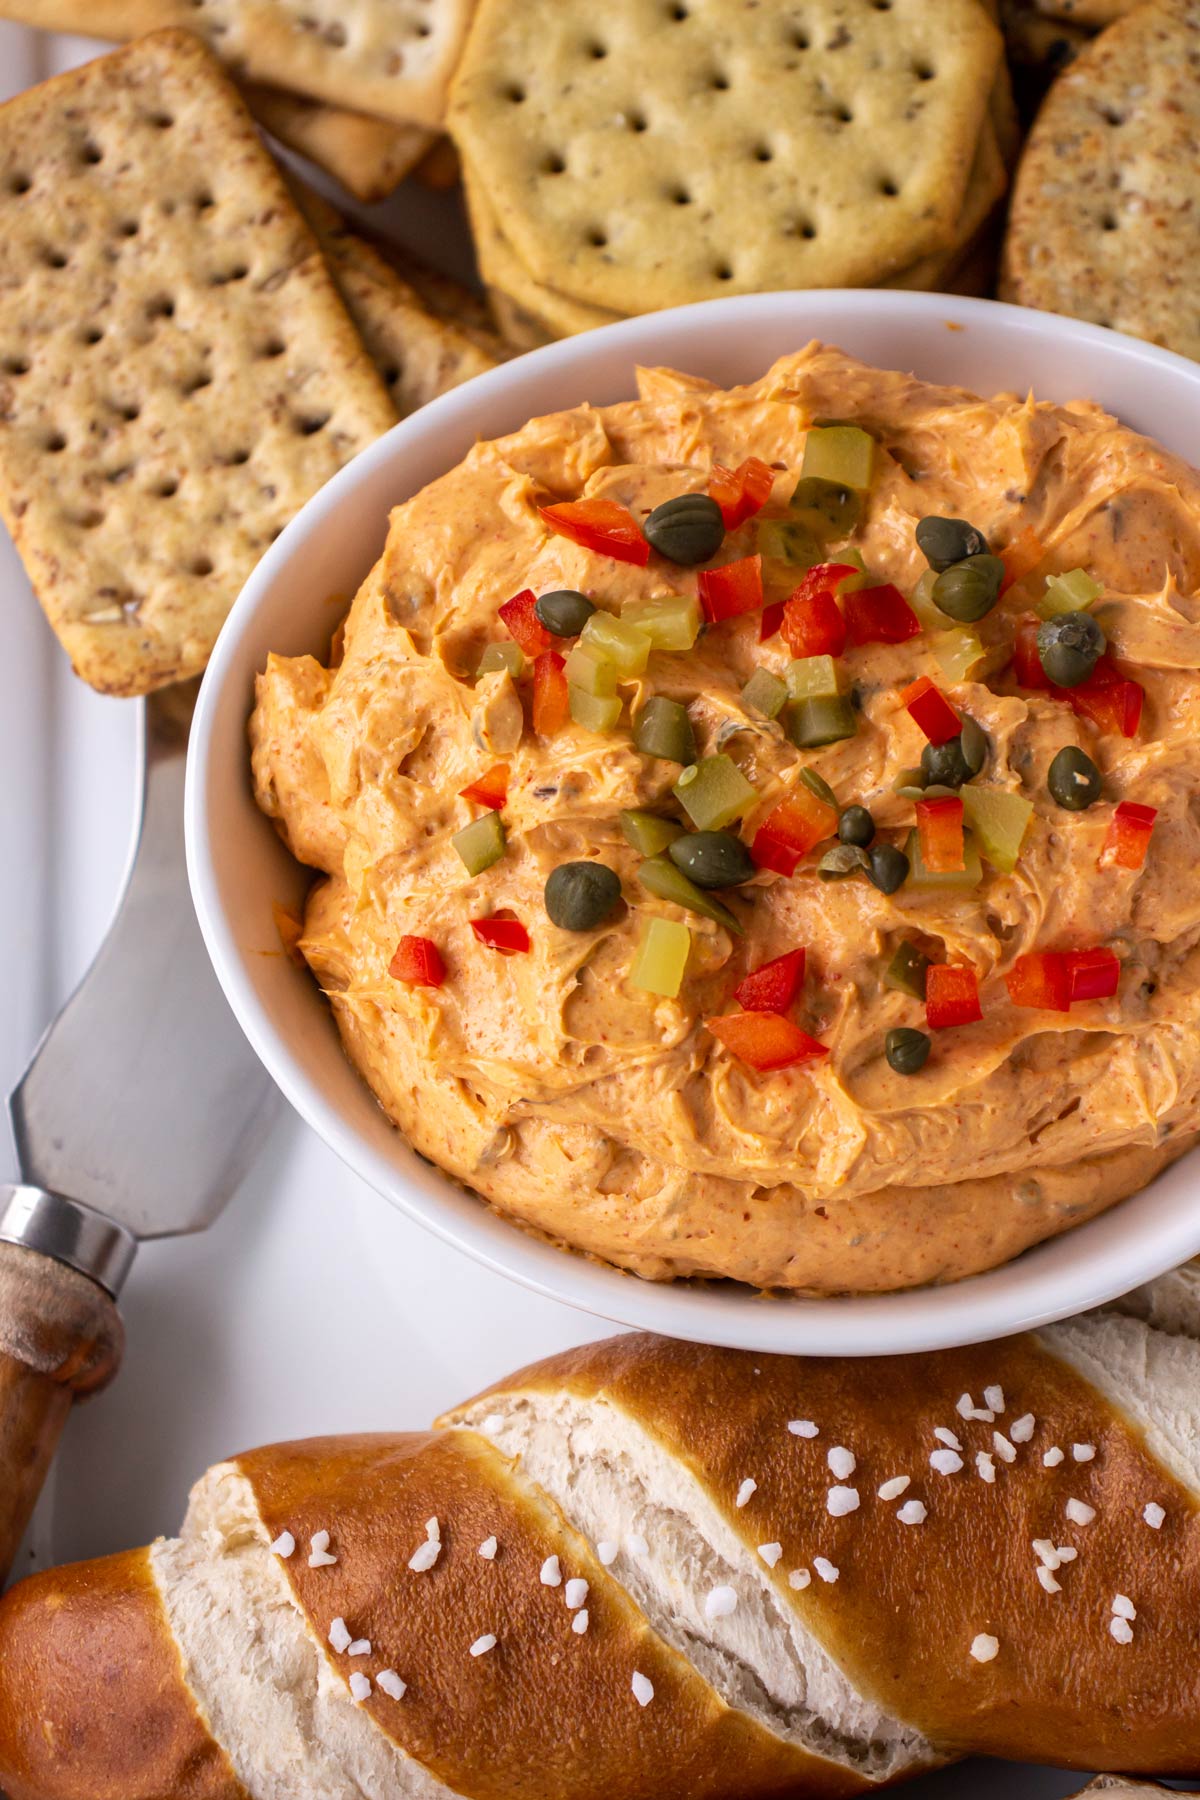 A bowl of paprika-infused cheese spread with crackers and soft pretzels on either side.